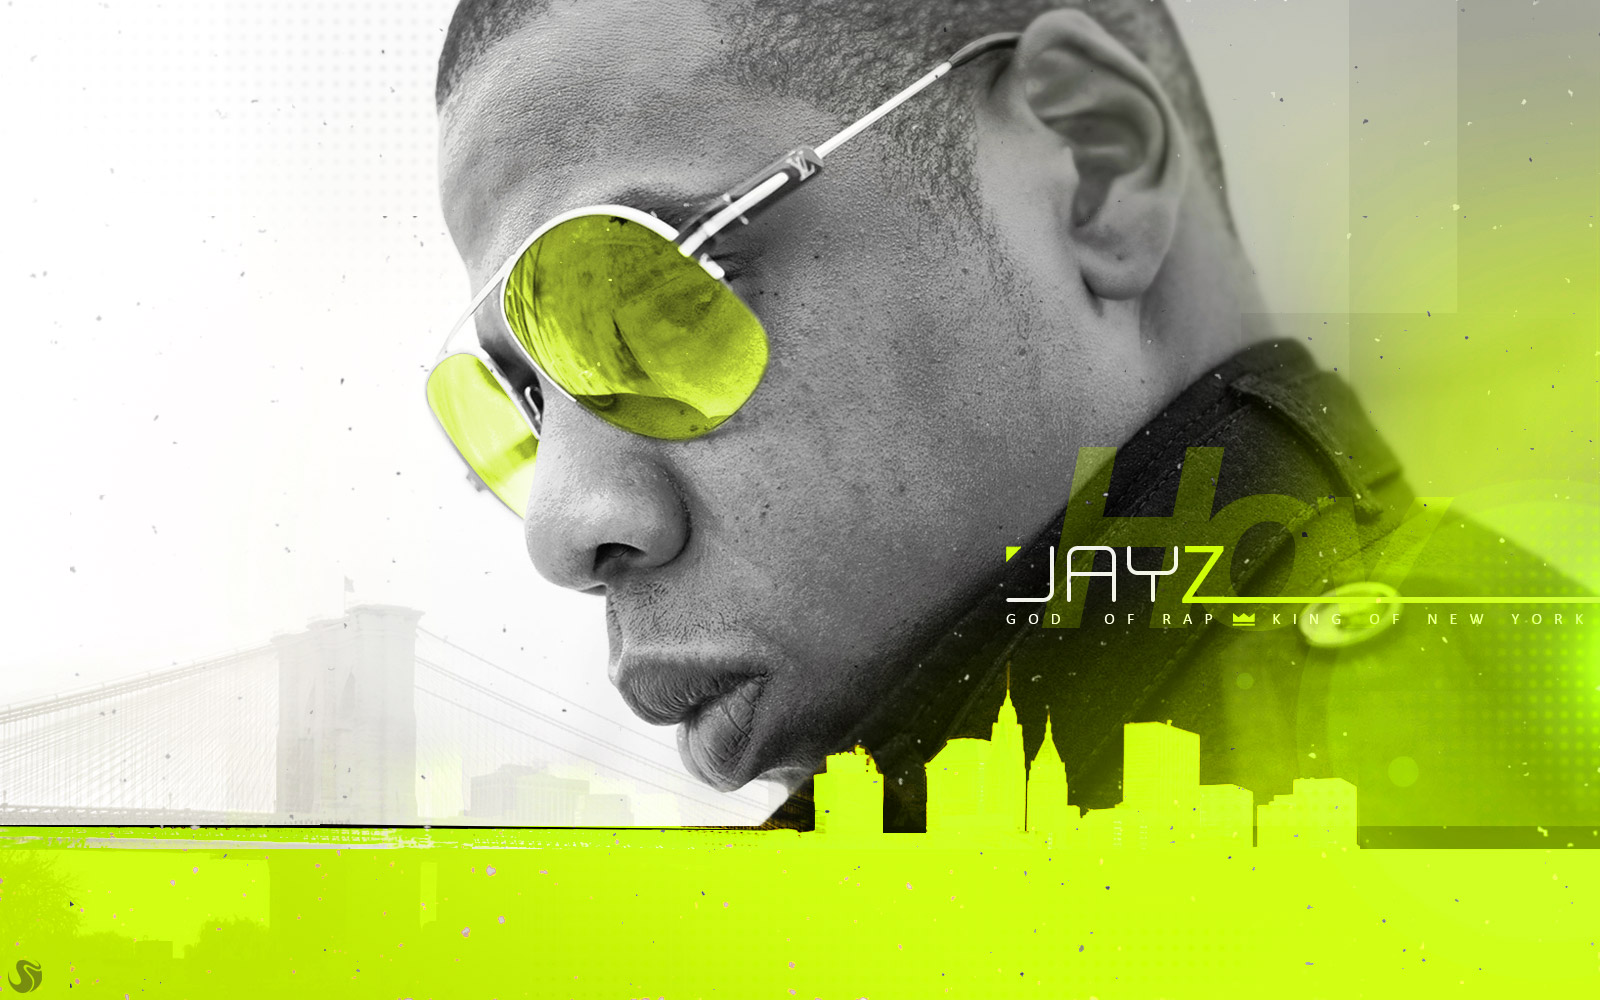 You Can Jay Z Wallpaper HD In Your Puter By Clicking